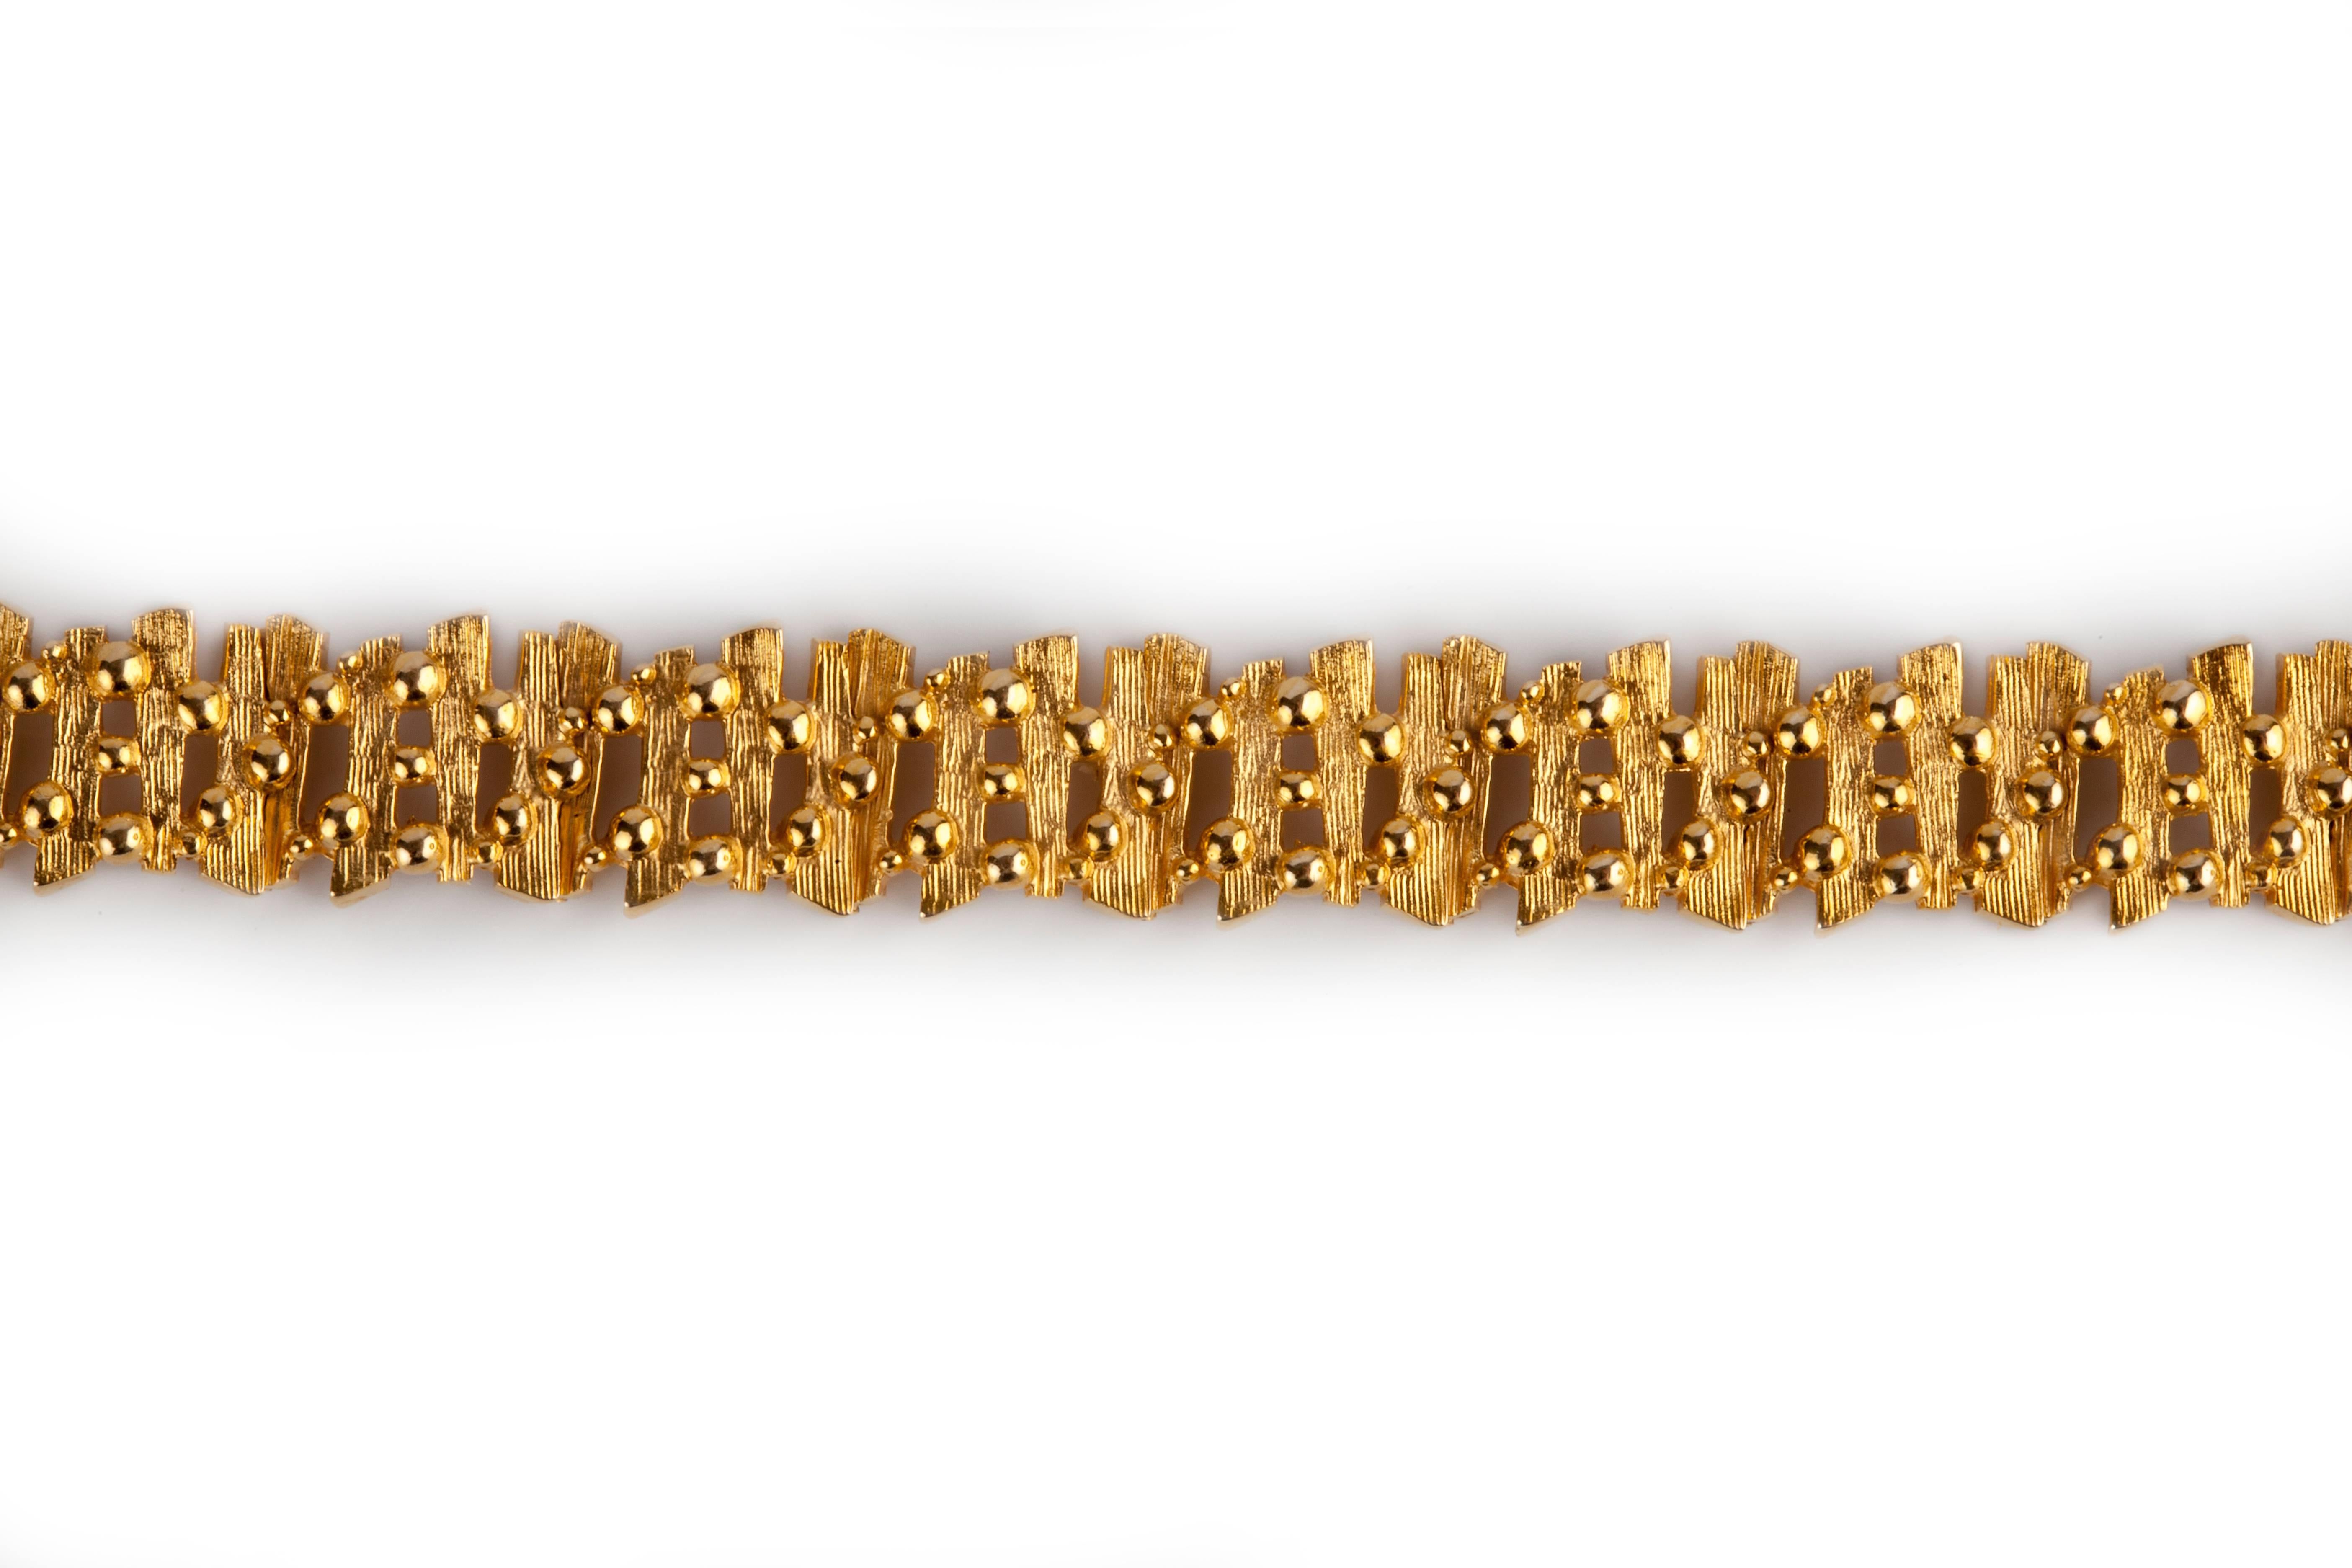 A bark effect 9k gold 1970s bracelet, made by the goldsmiths David Shackman and Sons, who were working in london during from the 1950s onwards.  They also made watch straps for Rolex and cases for them too, at a time when rolex would send the